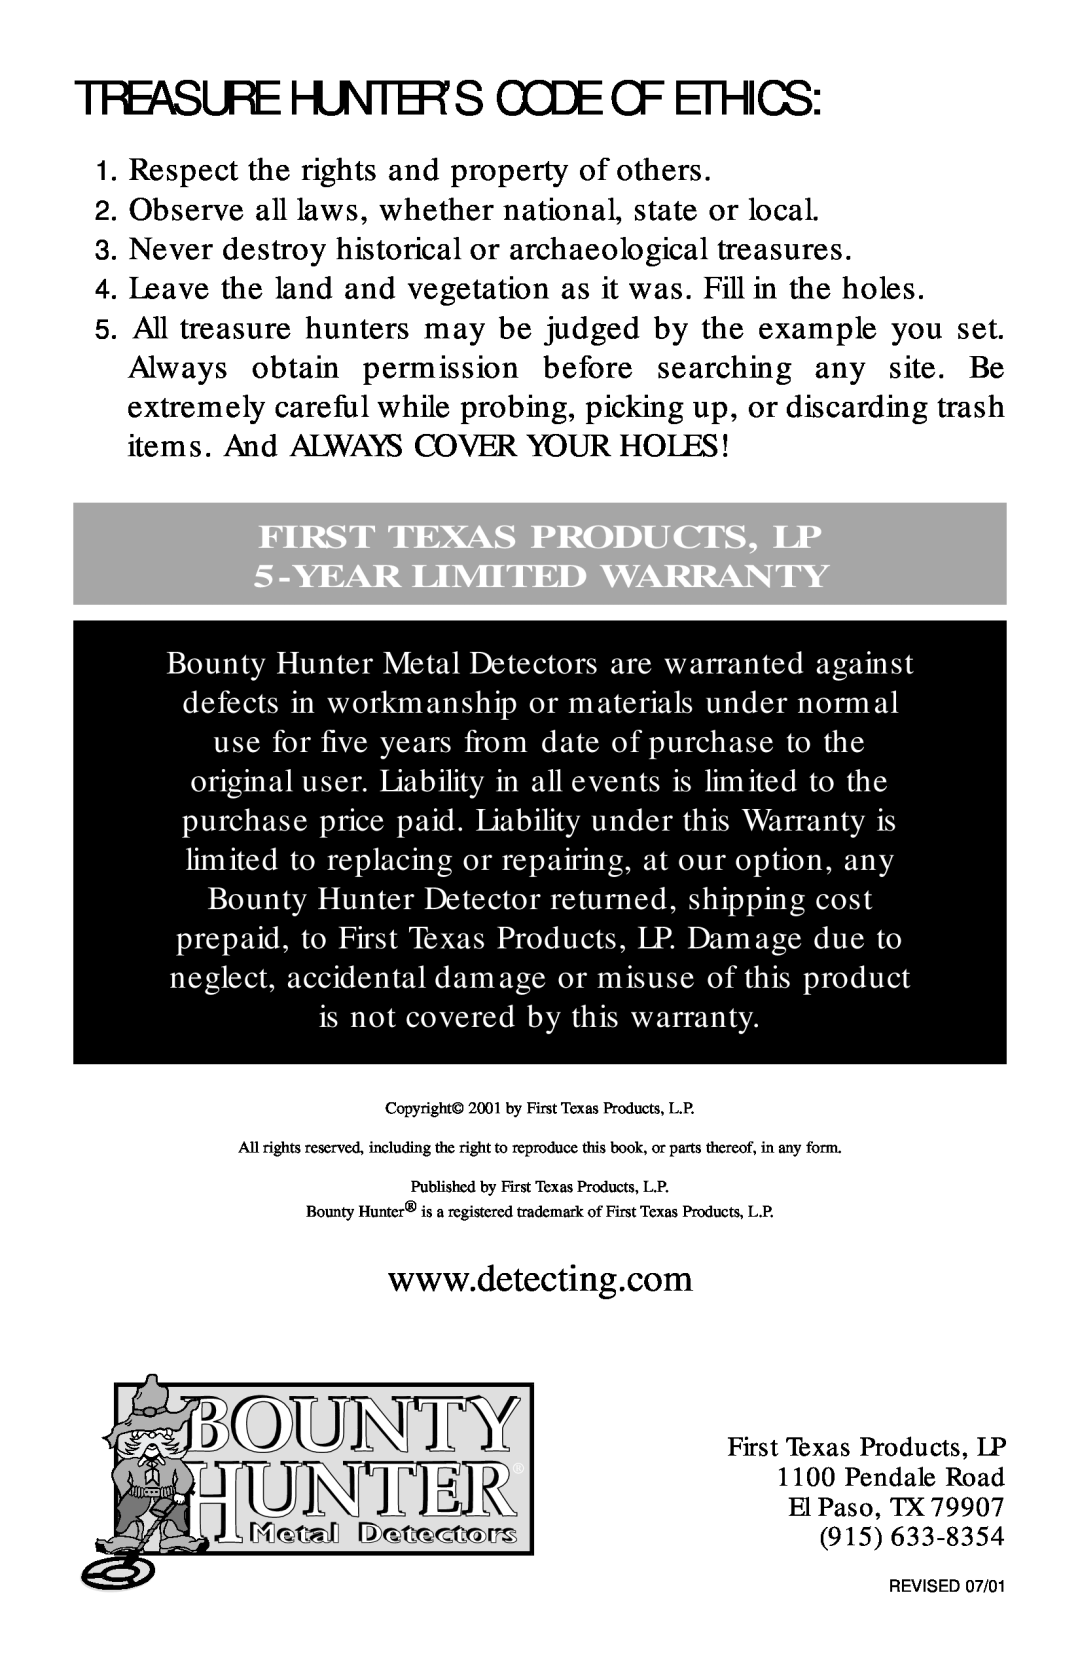 Bounty Hunter FAST owner manual Treasure Hunter’S Code Of Ethics, FIRST TEXAS PRODUCTS, LP 5-YEAR LIMITED WARRANTY 